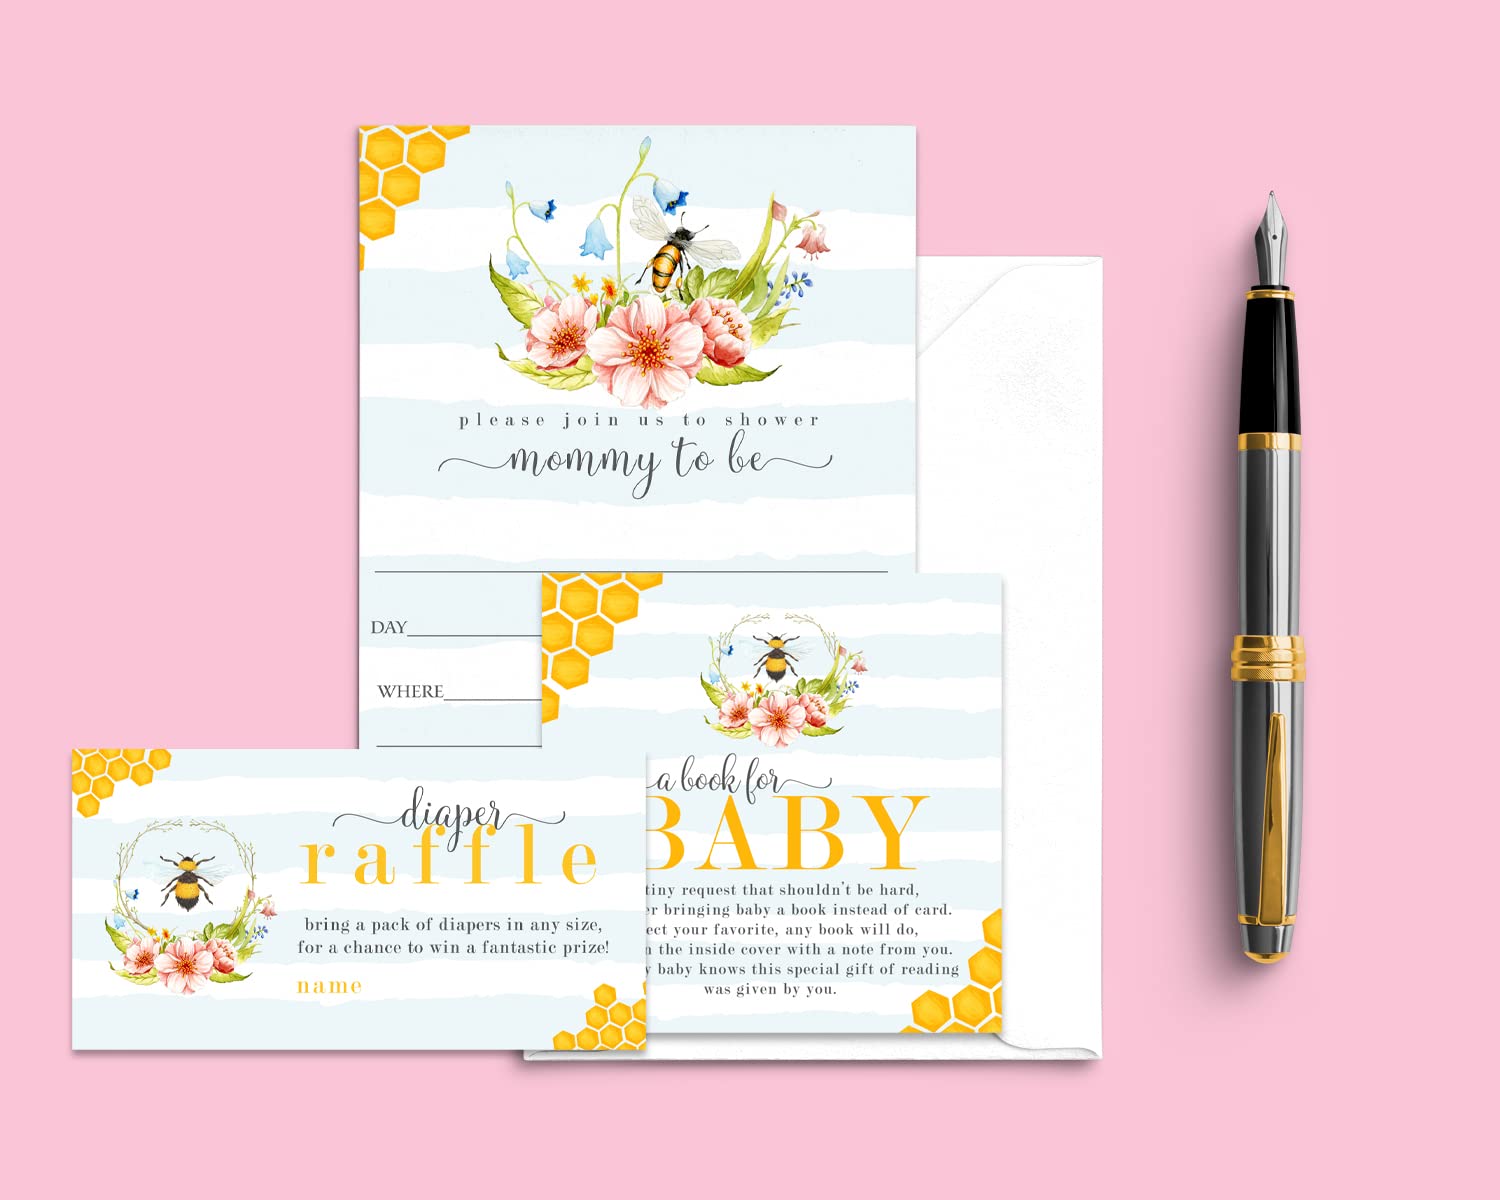 Bumblebee Baby Shower Invitation Bundle (25 Guests) Pack Includes Diaper Raffle Tickets, Bring a Book Cards, Blank Invites with Envelopes - Bee Theme Gender Reveal